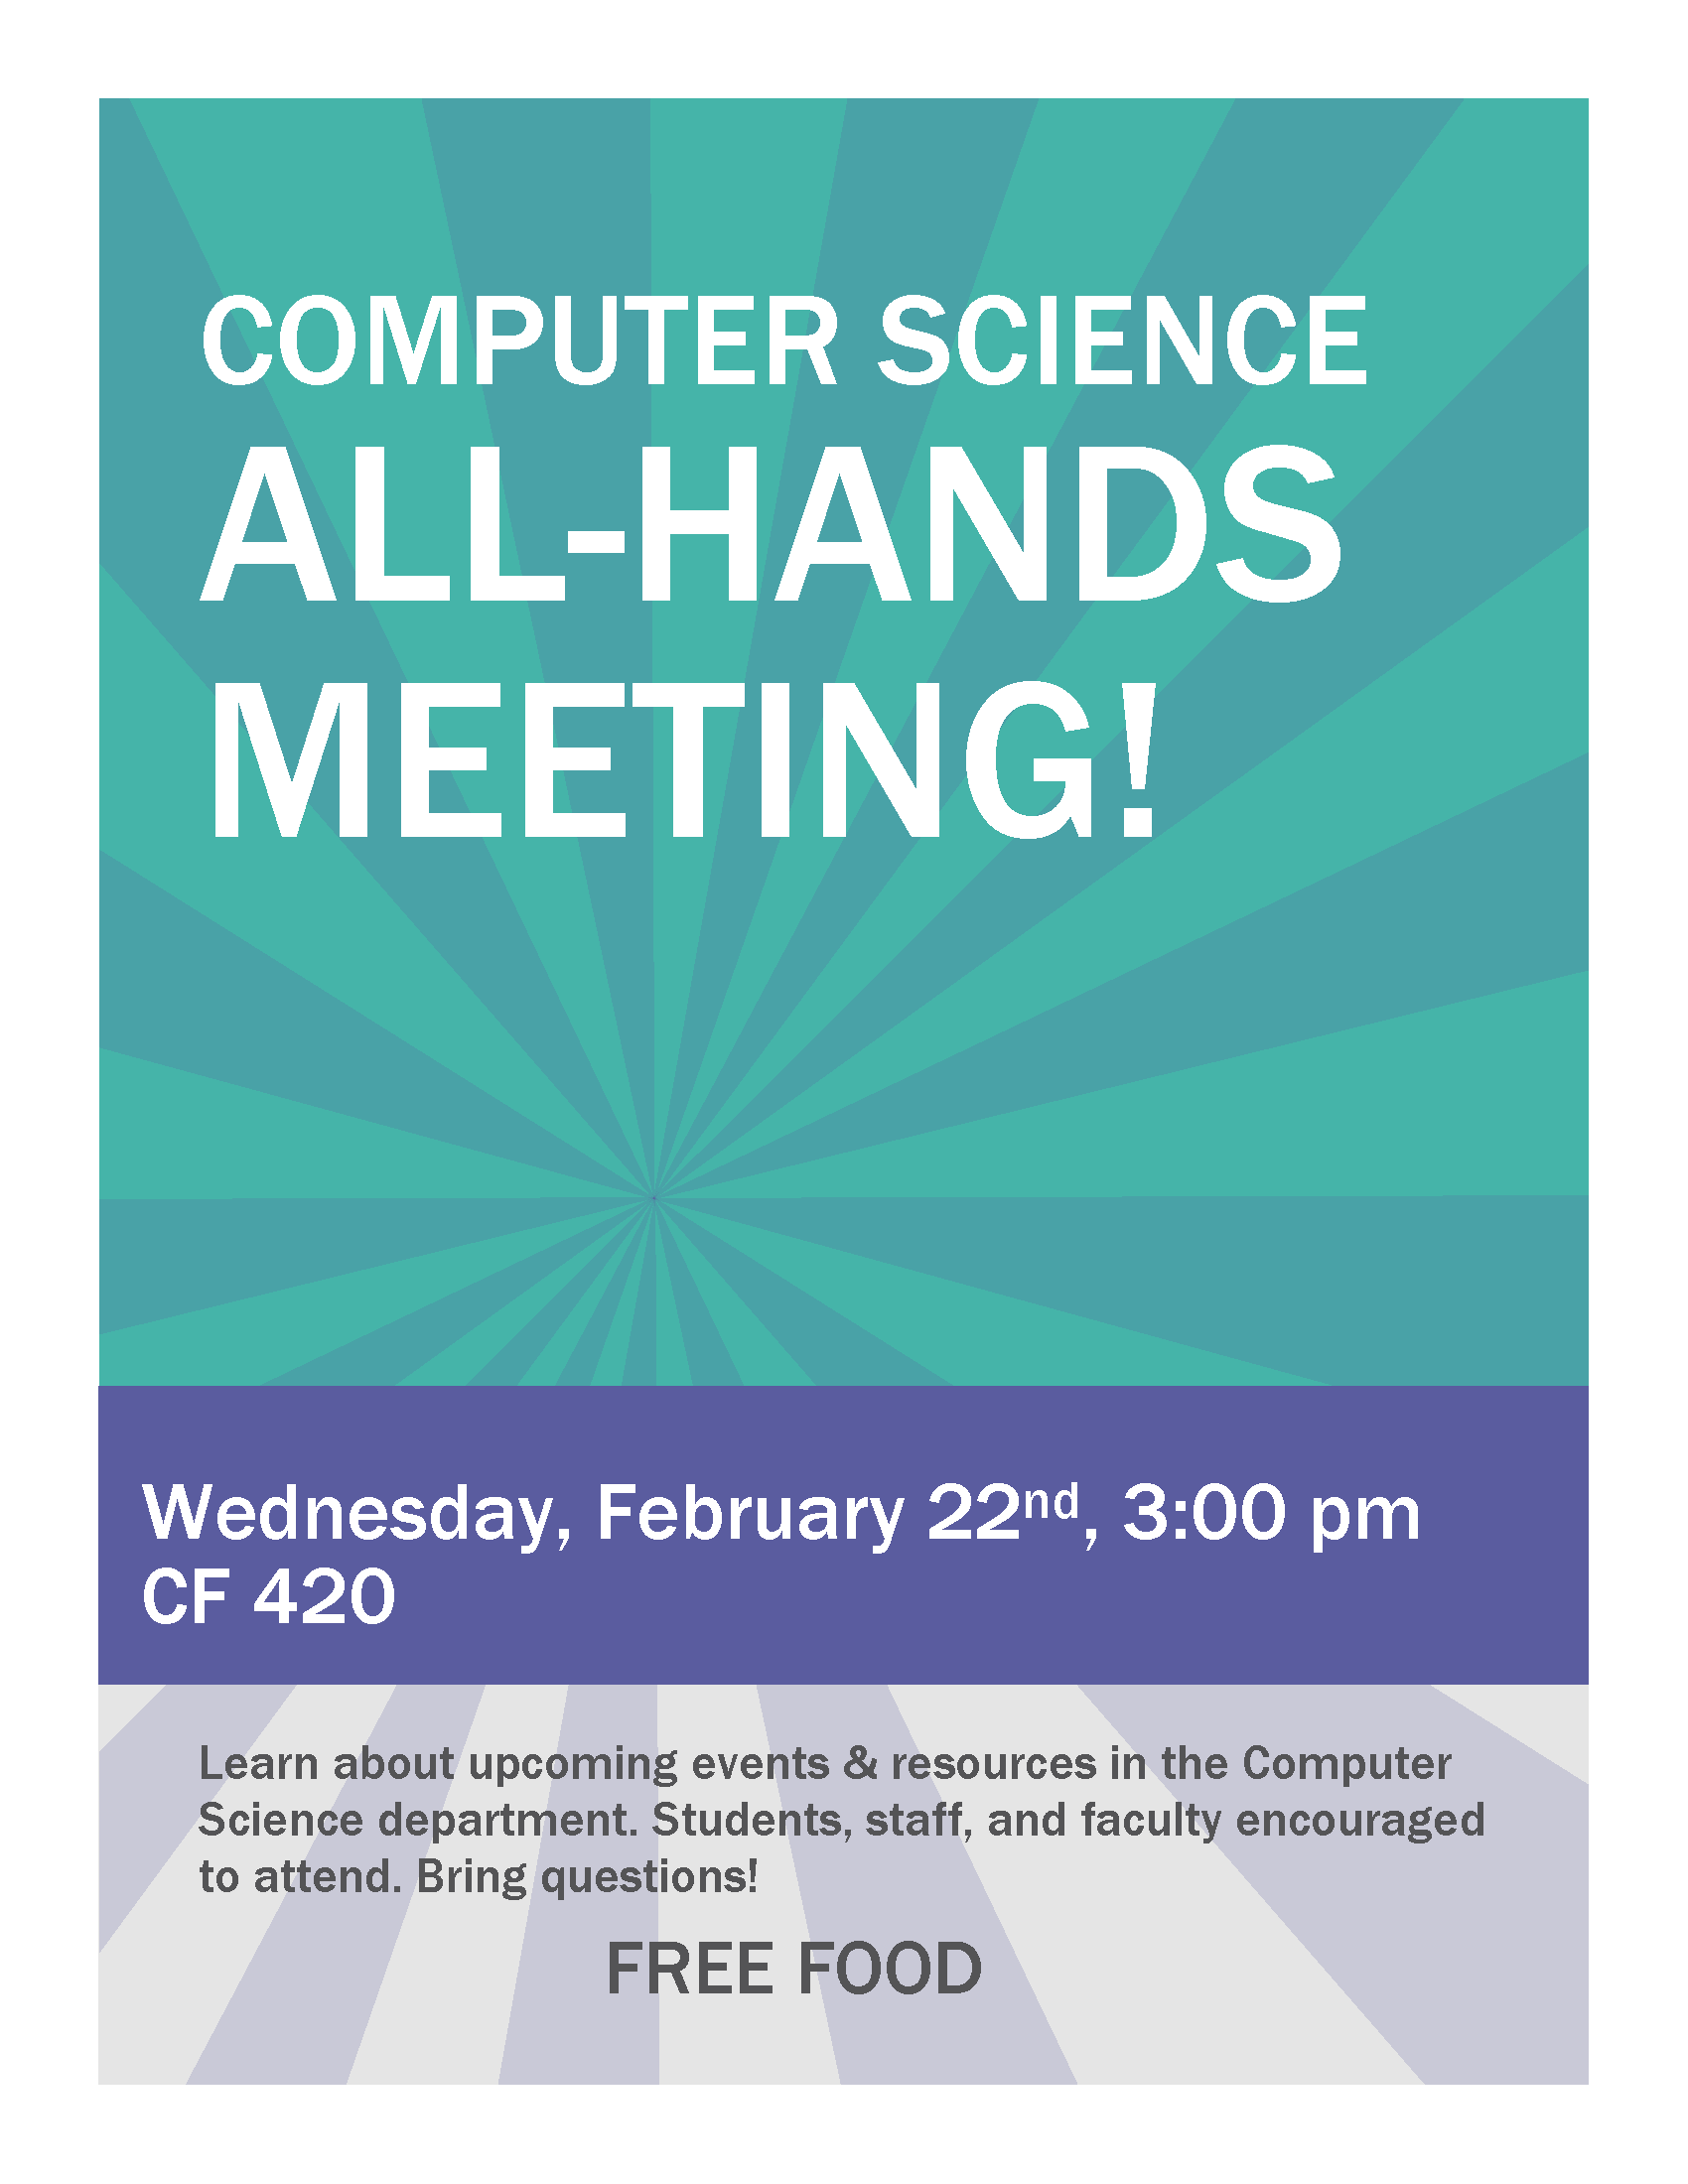 Computer Science All-Hands meeting! Wednesday, February 22 at 3:00 PM in CF 420.